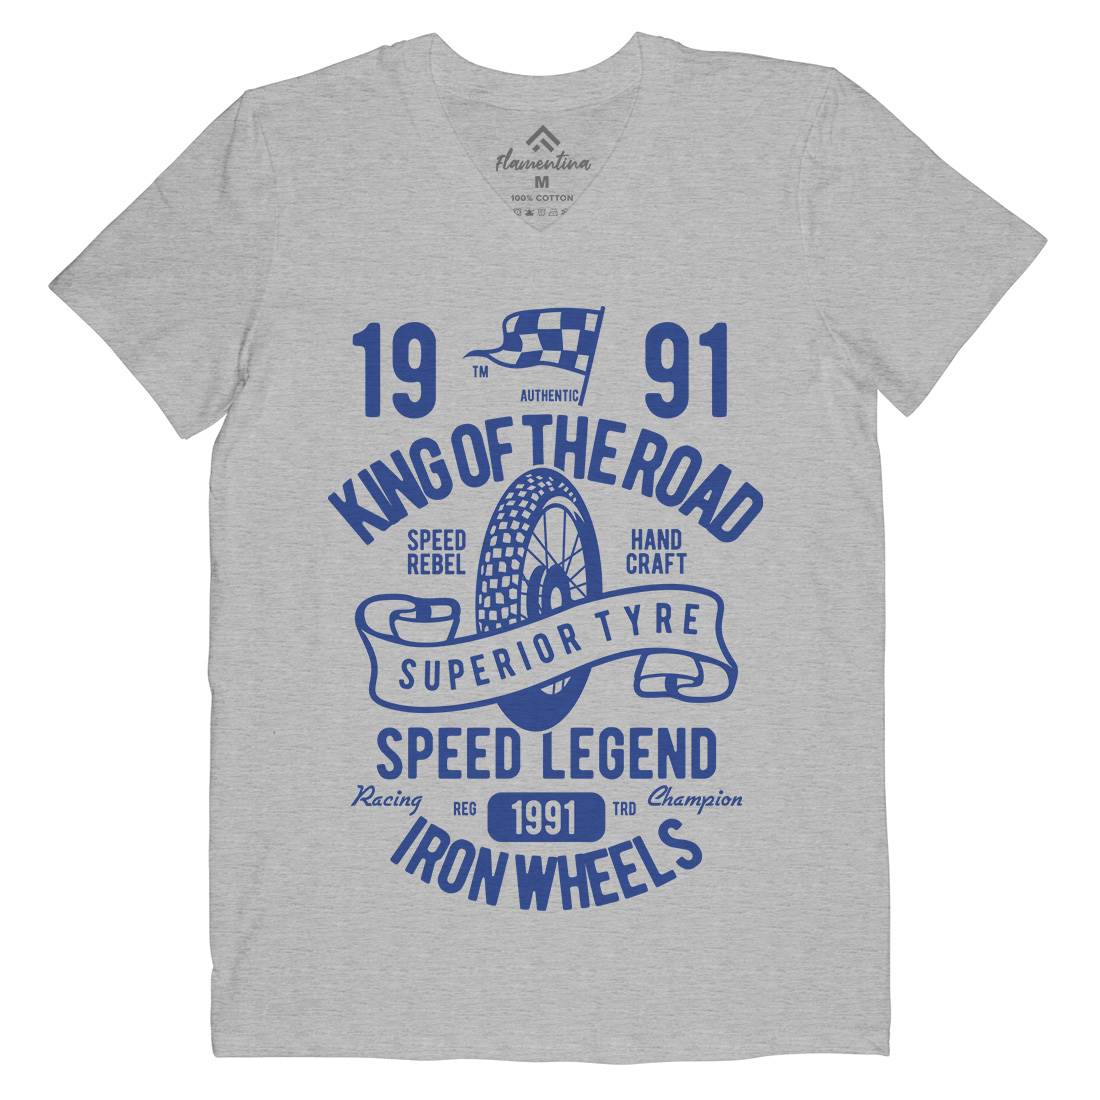 Superior Tyre King Of The Road Mens Organic V-Neck T-Shirt Motorcycles B458